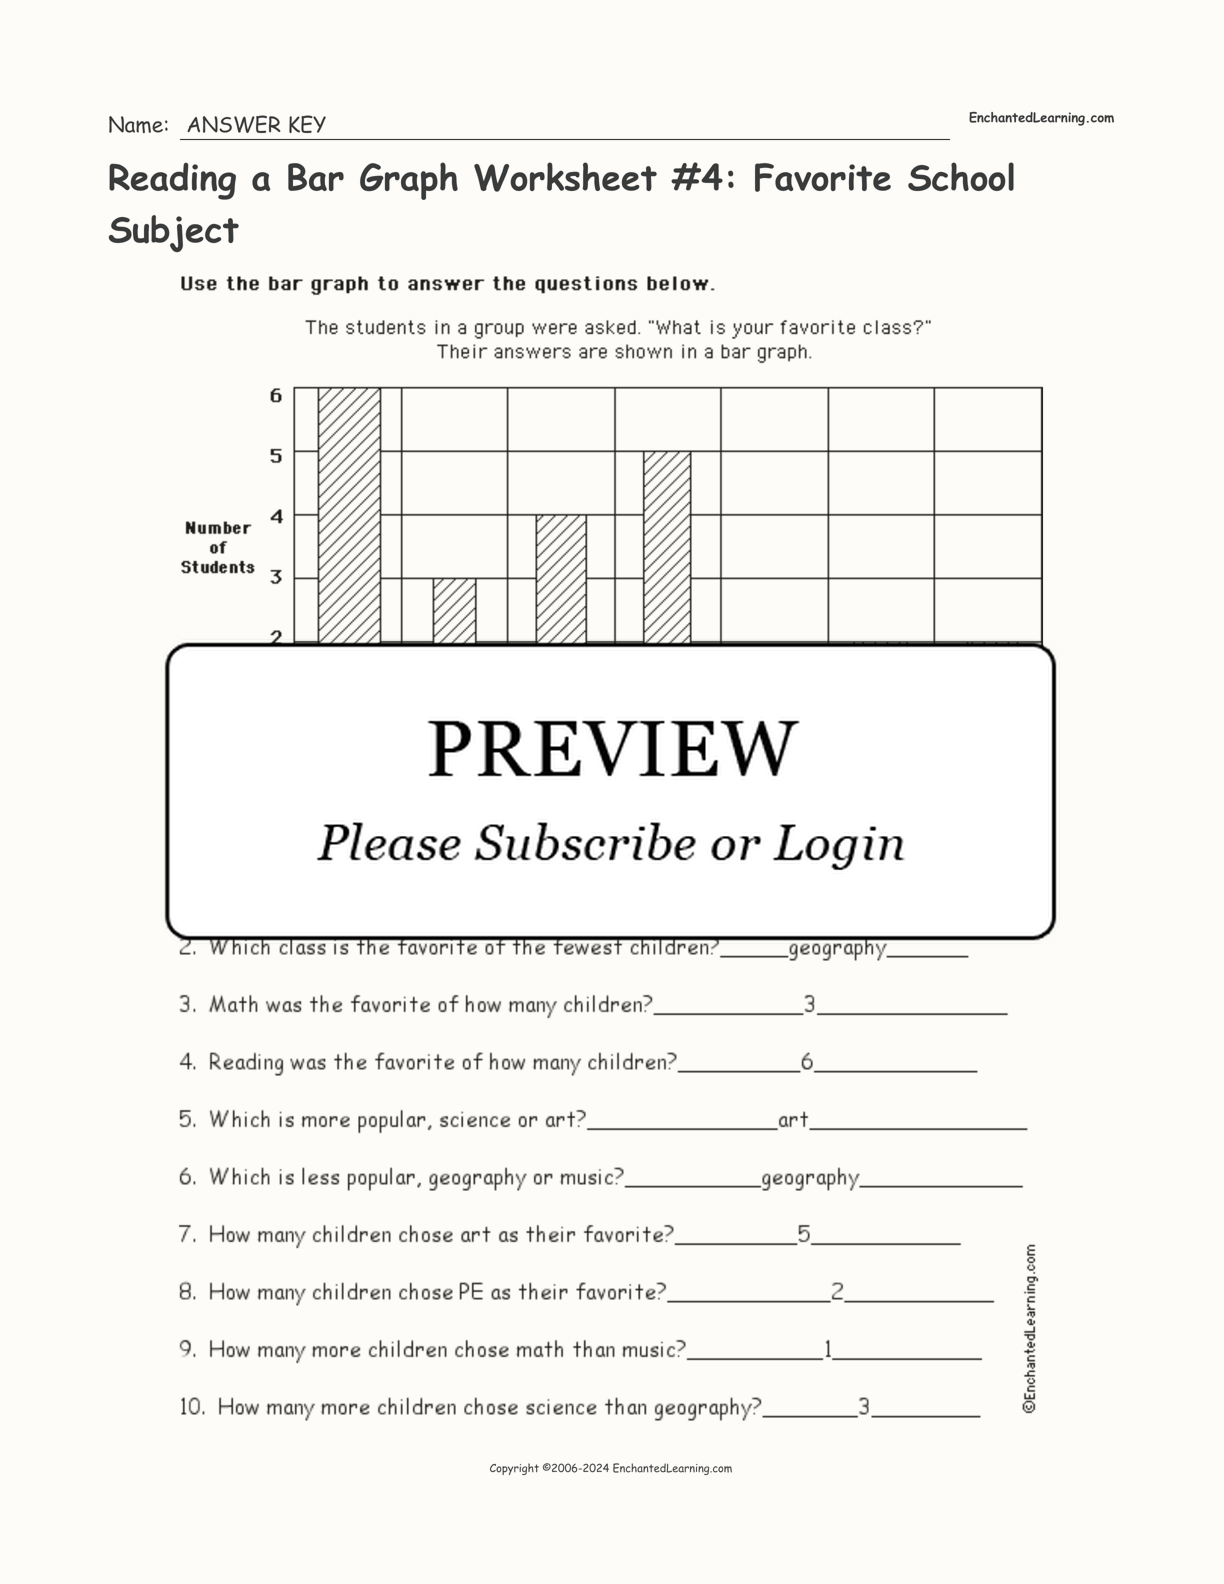 Reading a Bar Graph Worksheet #4: Favorite School Subject interactive worksheet page 2